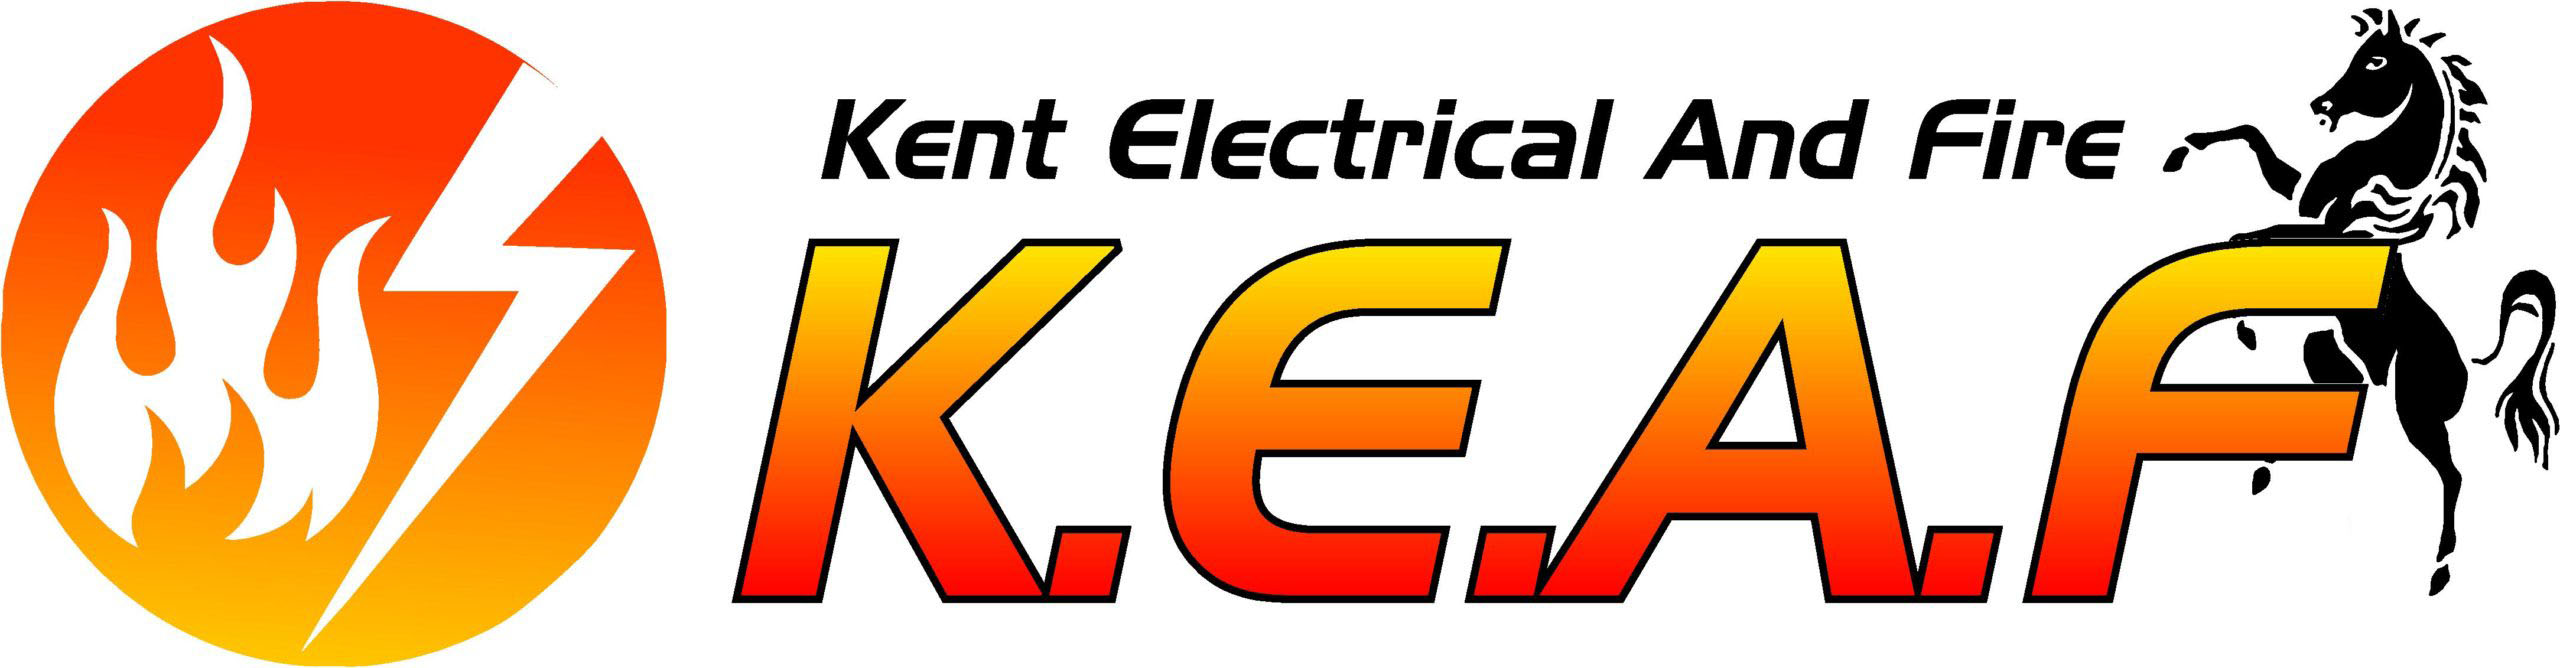 Kent electrical and fire